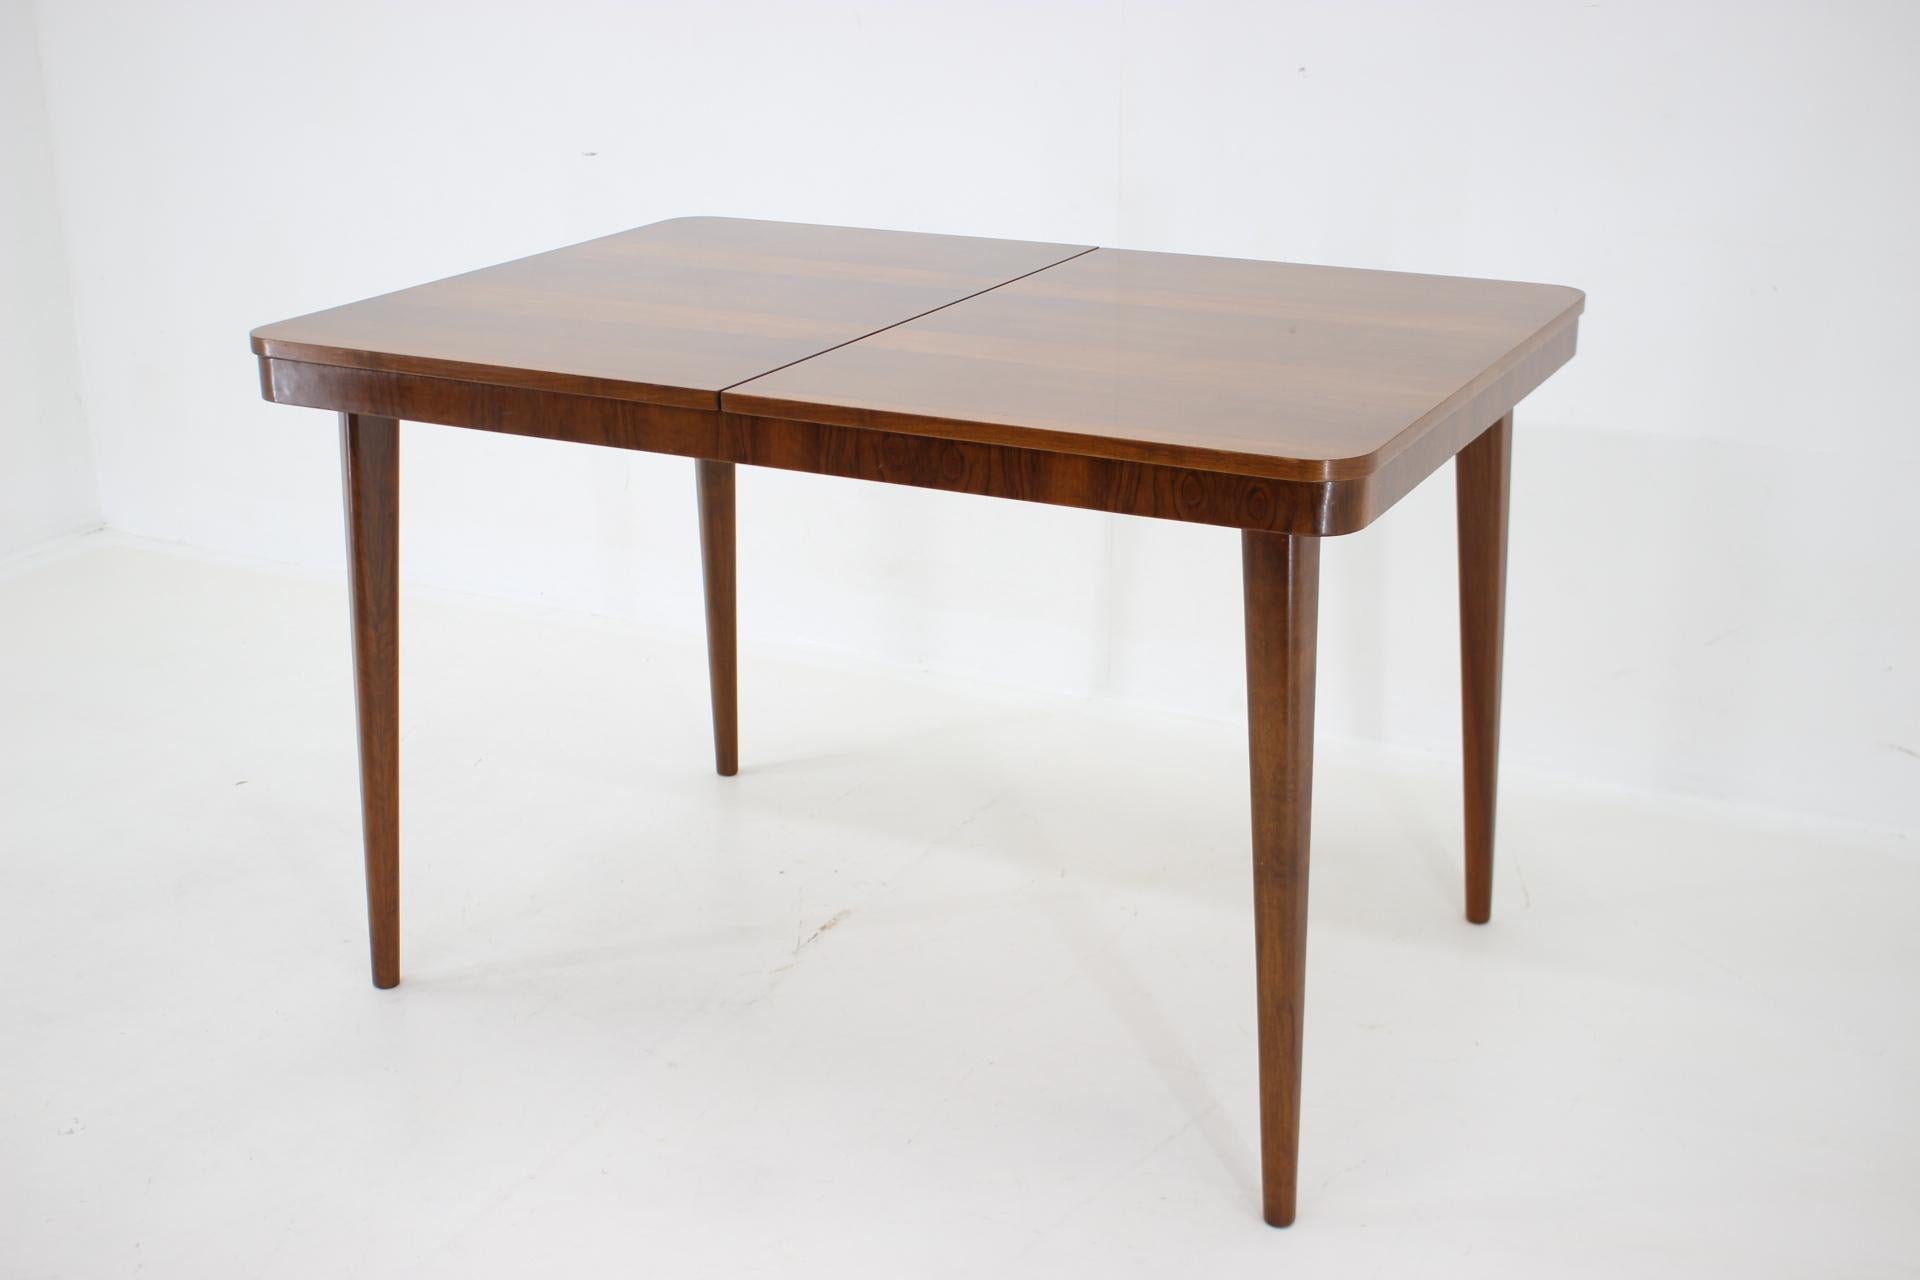 Mid-Century Modern 1950s Extendable Dining Table in Walnut by UP zavody, Czechoslovakia For Sale